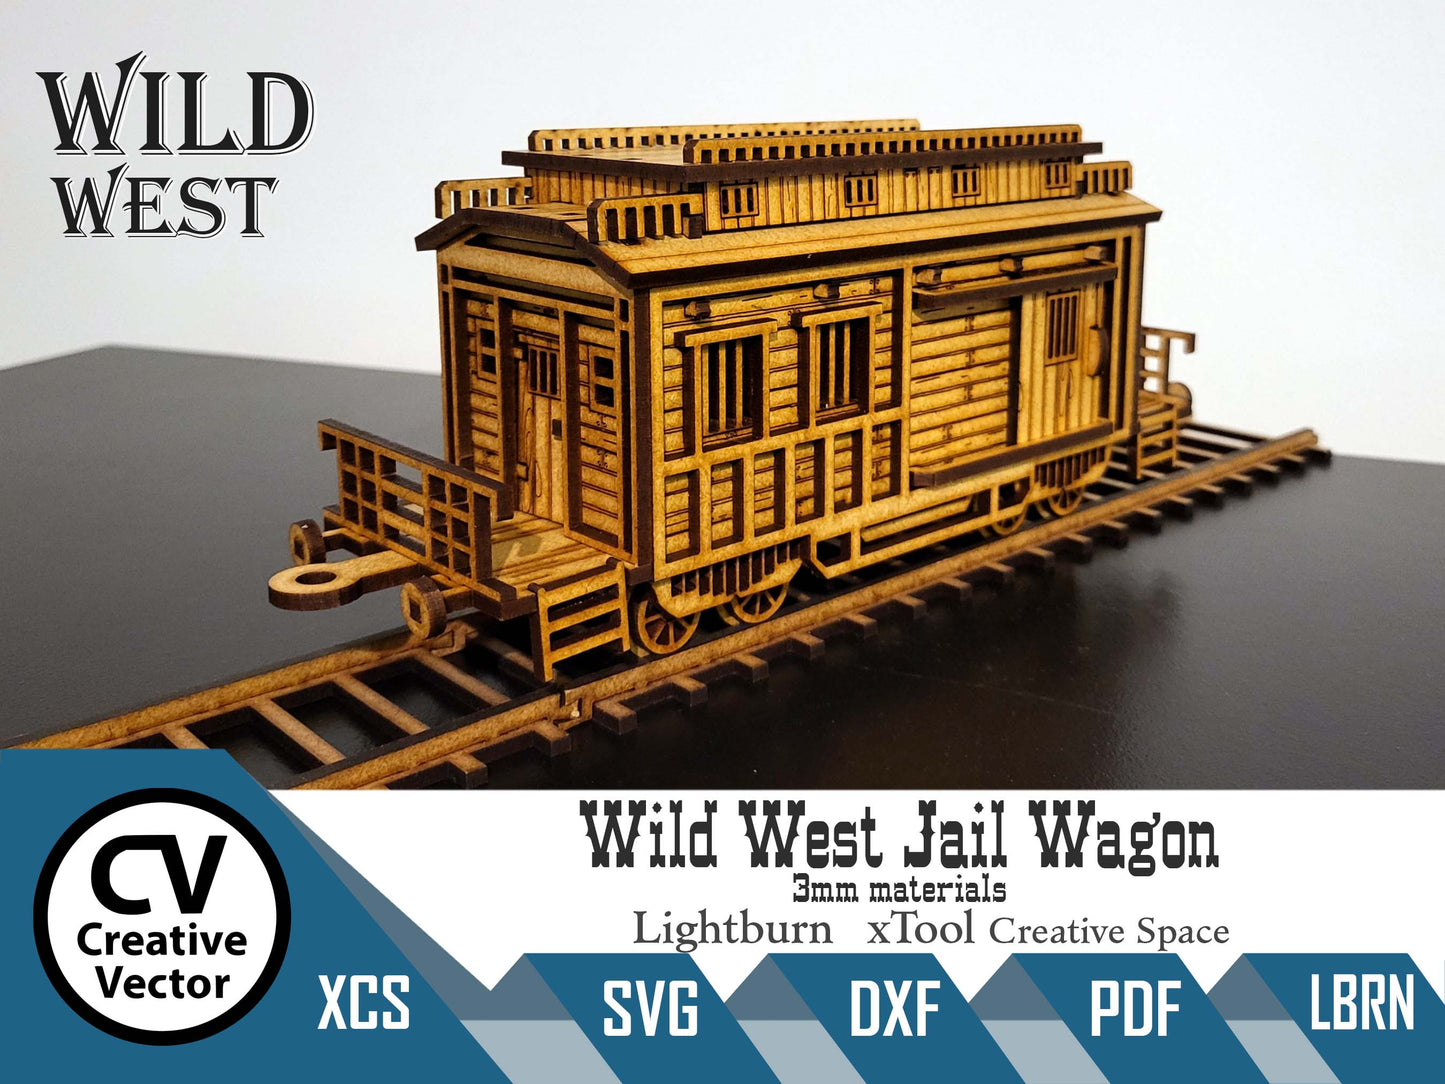 Wild West Jail wagon + rails  in scale 28mm for Wargamers